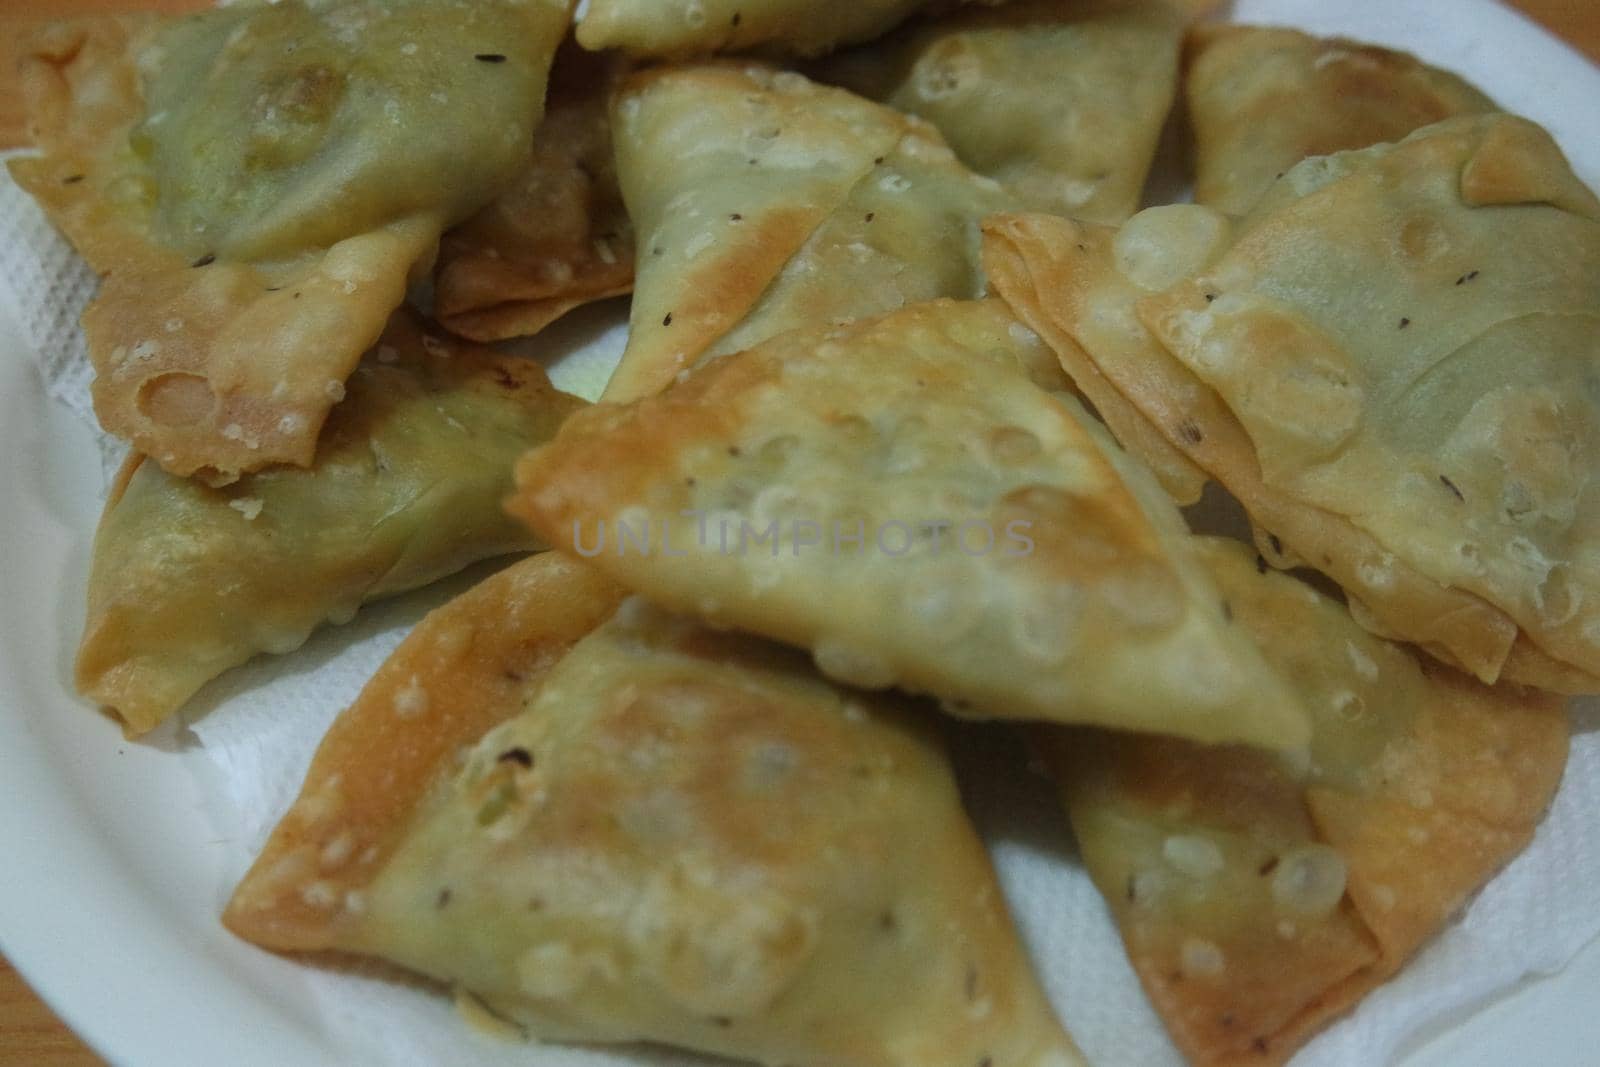 Closeup of delicious home made spicy and crunchy samosa pastries placed in a white ceramic plate on wooden floor